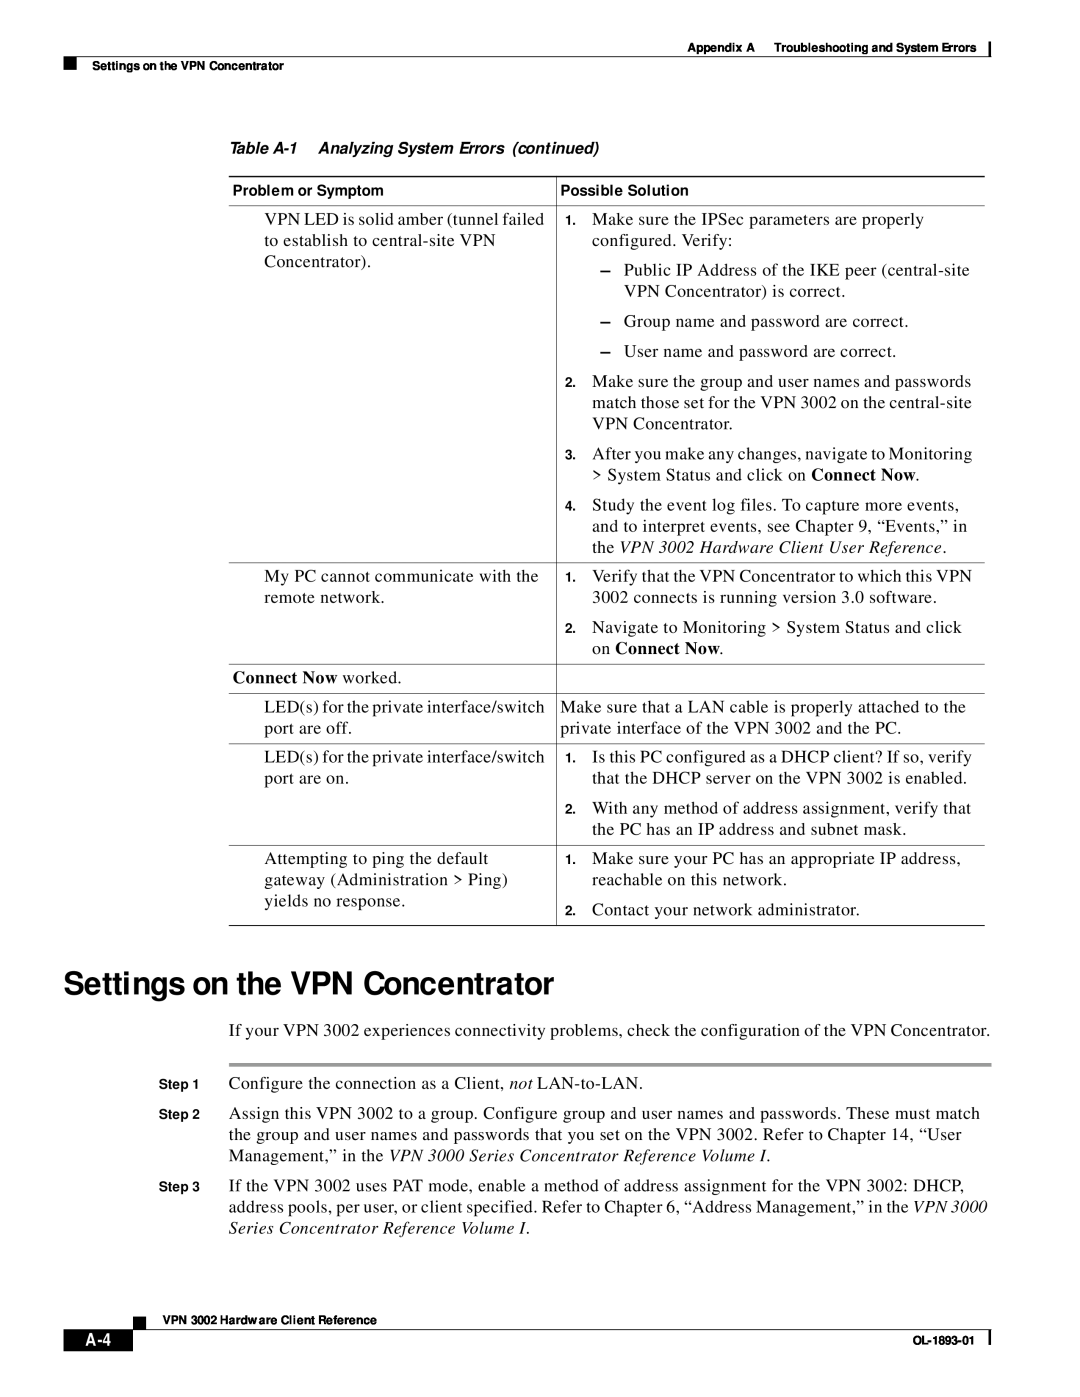 Cisco Systems manual Settings on the VPN Concentrator, the VPN 3002 Hardware Client User Reference, on Connect Now 